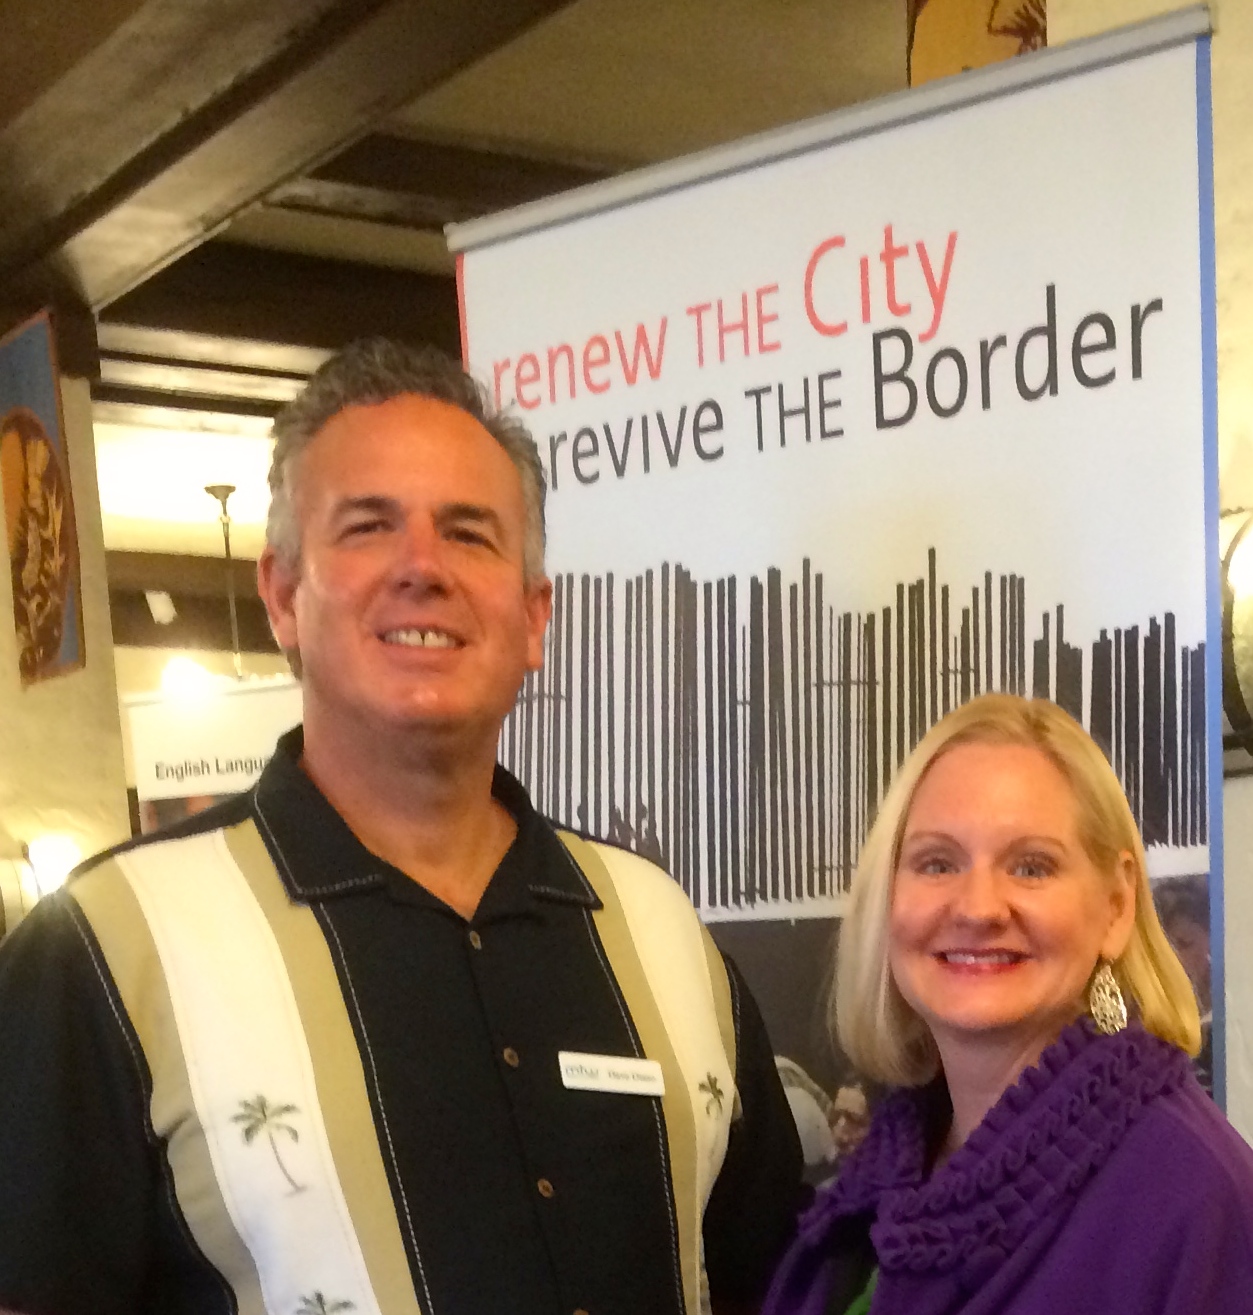 Dave and Dawn - thankful for the Lord's renewing work on the border